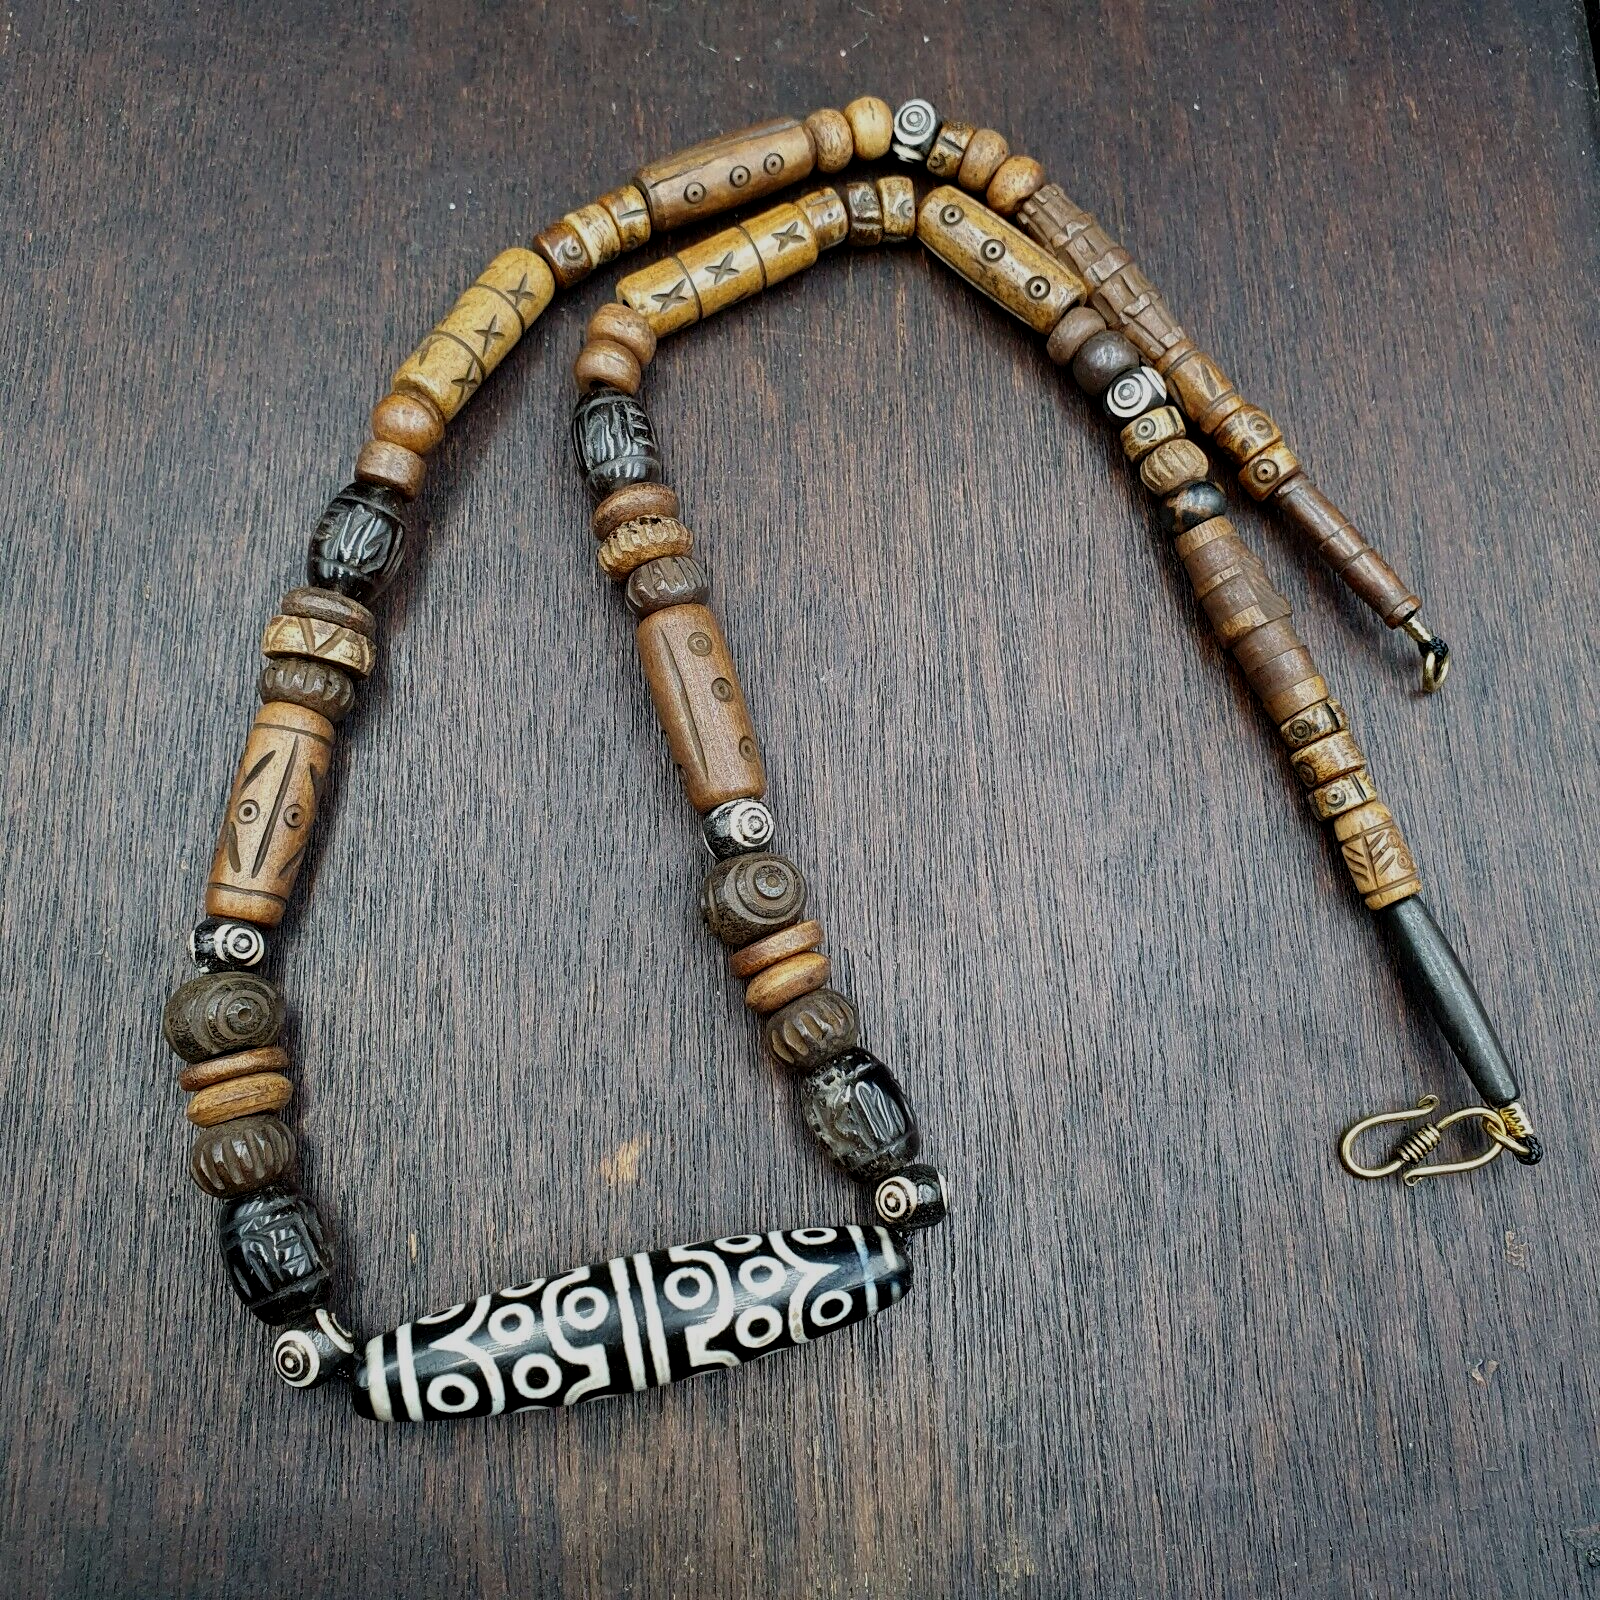 "Vintage Tibetan Himalayan Agate and Yak Bone Amulet Necklace. A unique and culturally significant necklace featuring a intricately carved agate bead with 24 eyes, accompanied by yak bone accents. This traditional Tibetan amulet is said to bring protection and good fortune, and showcases the region's rich spiritual heritage."